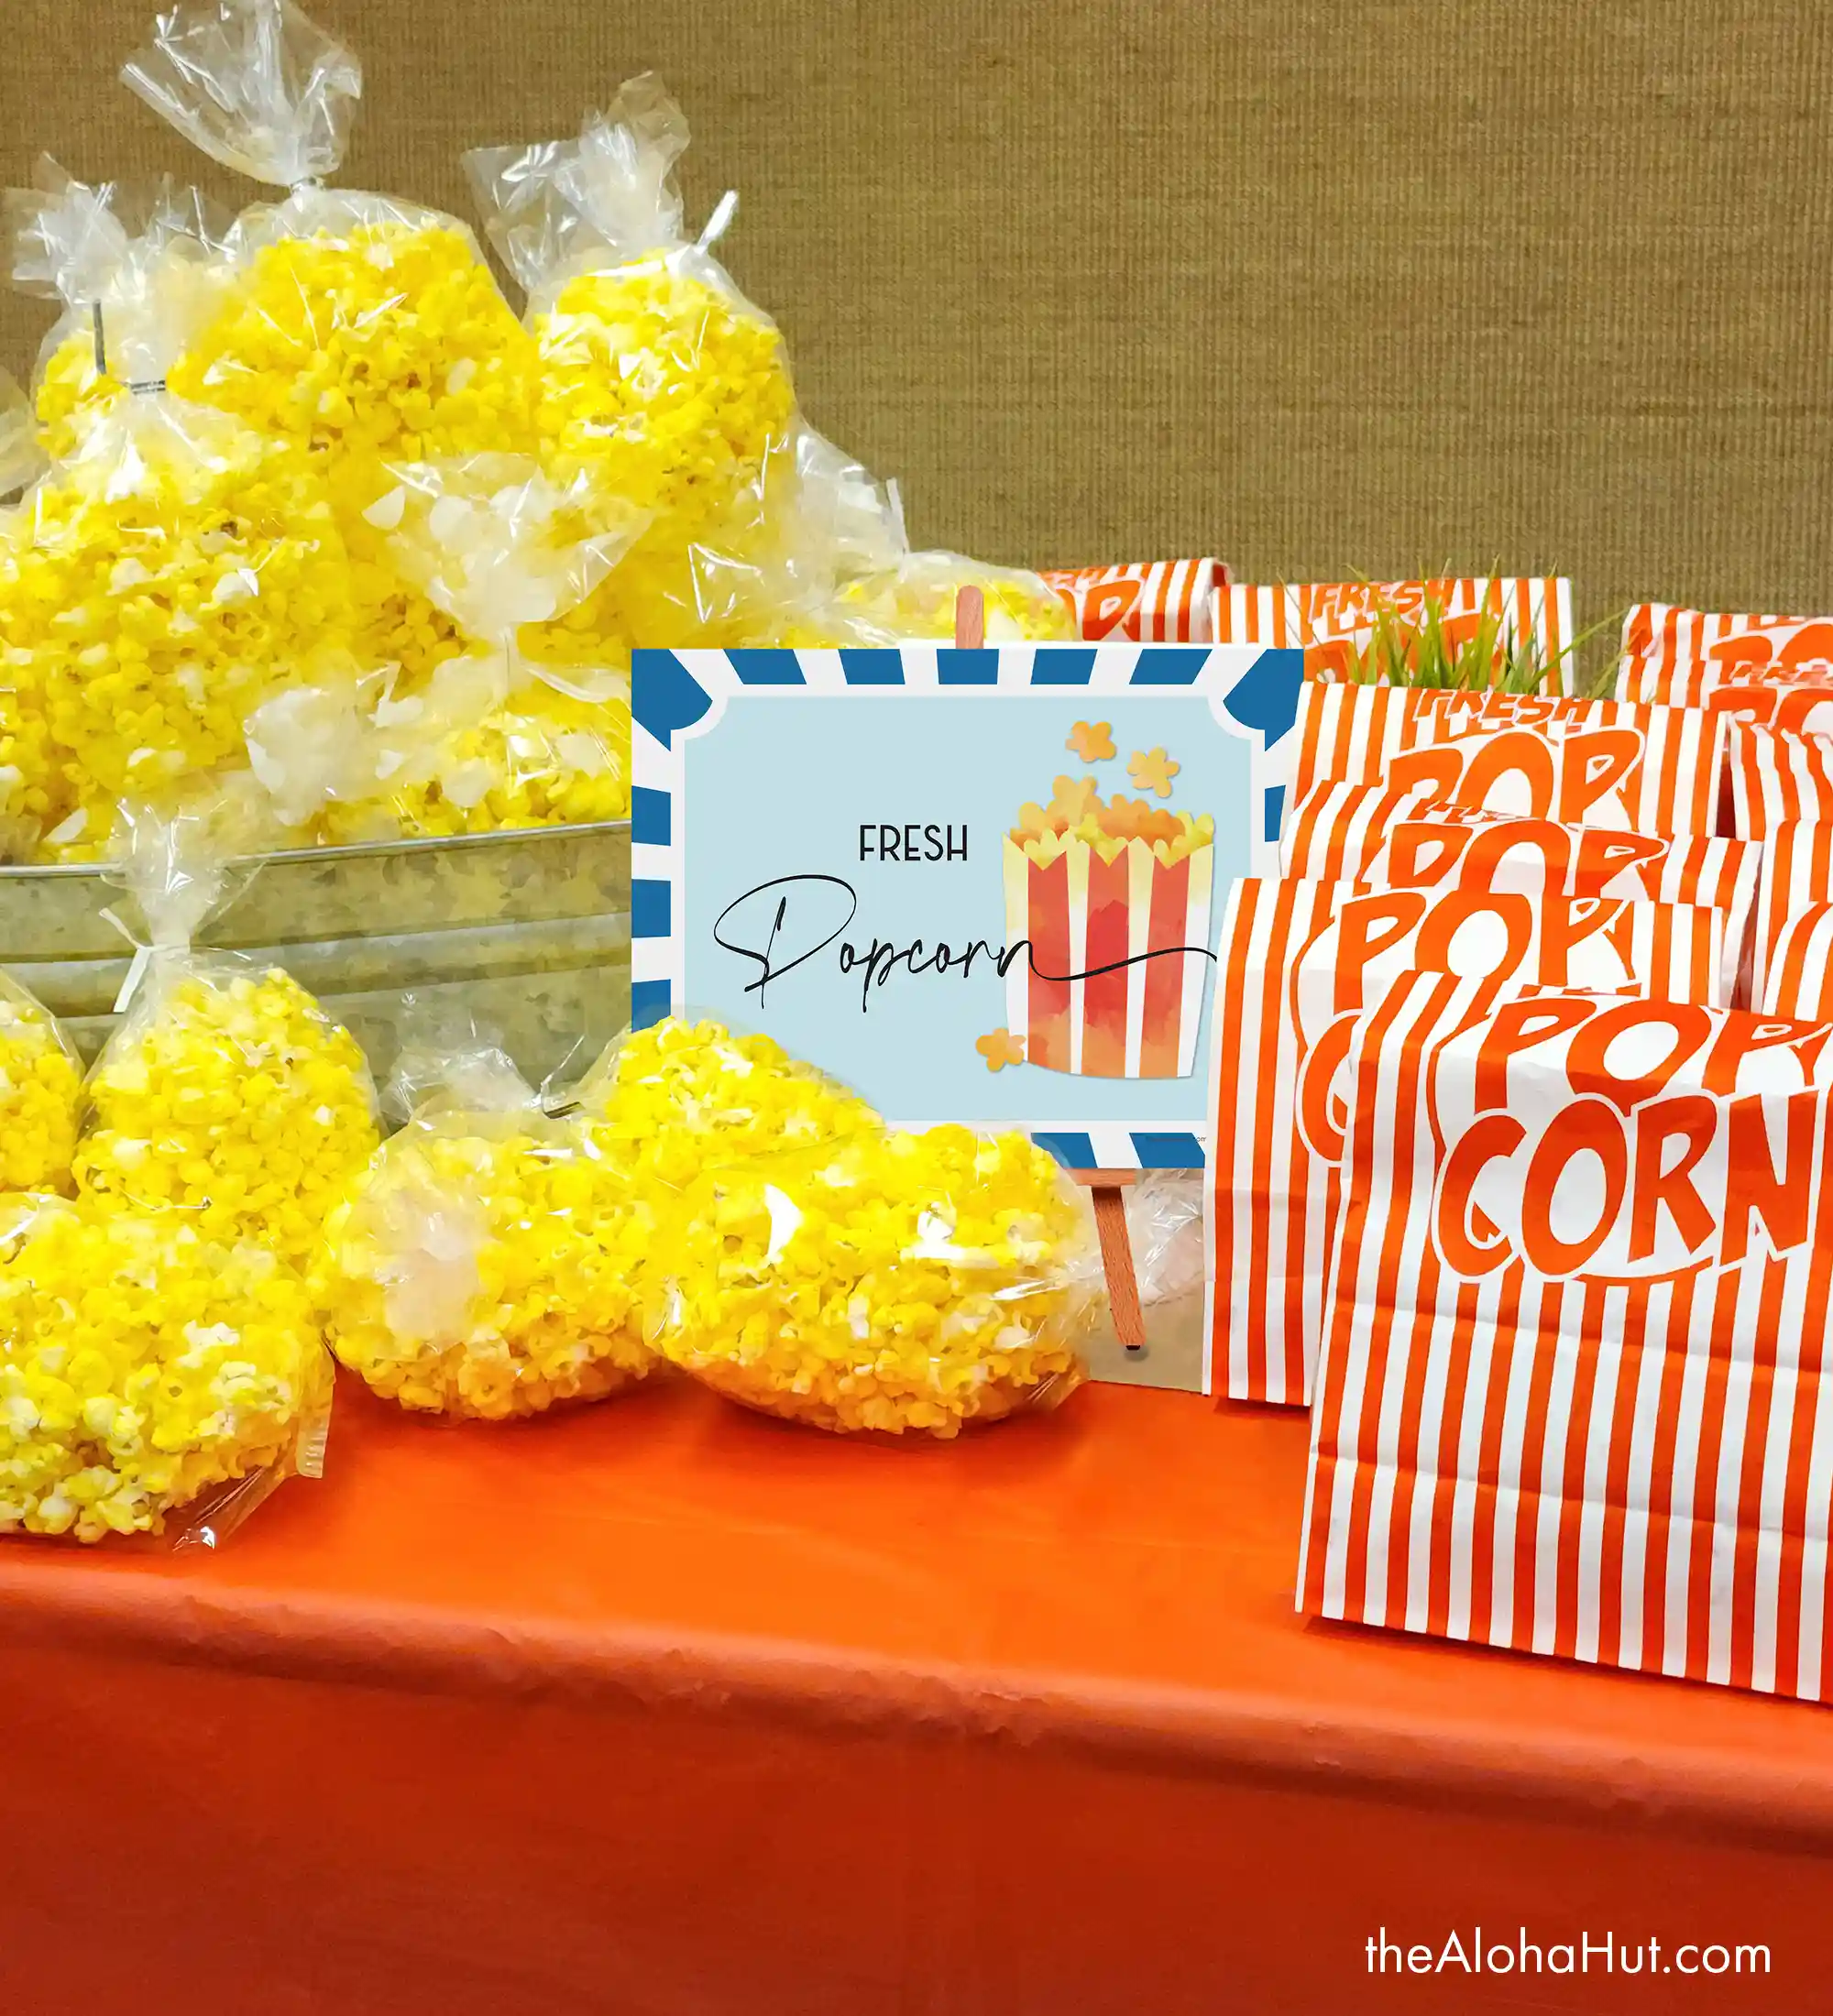 Carnival Party Ideas - Popcorn Signs